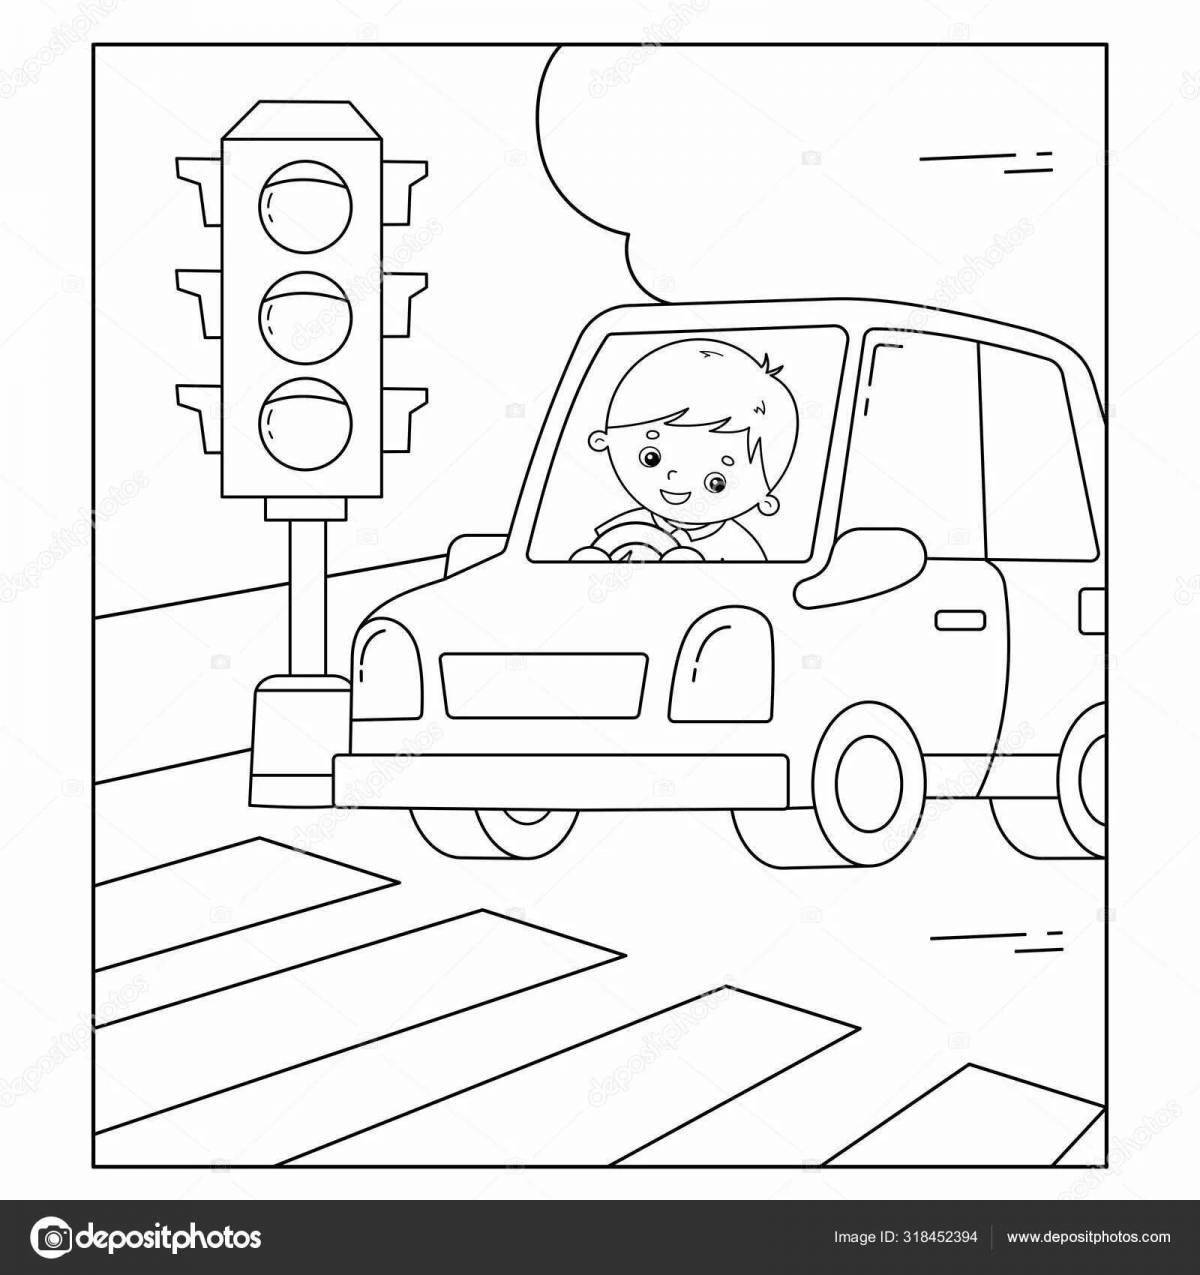 Bright rules of the road coloring for the little ones